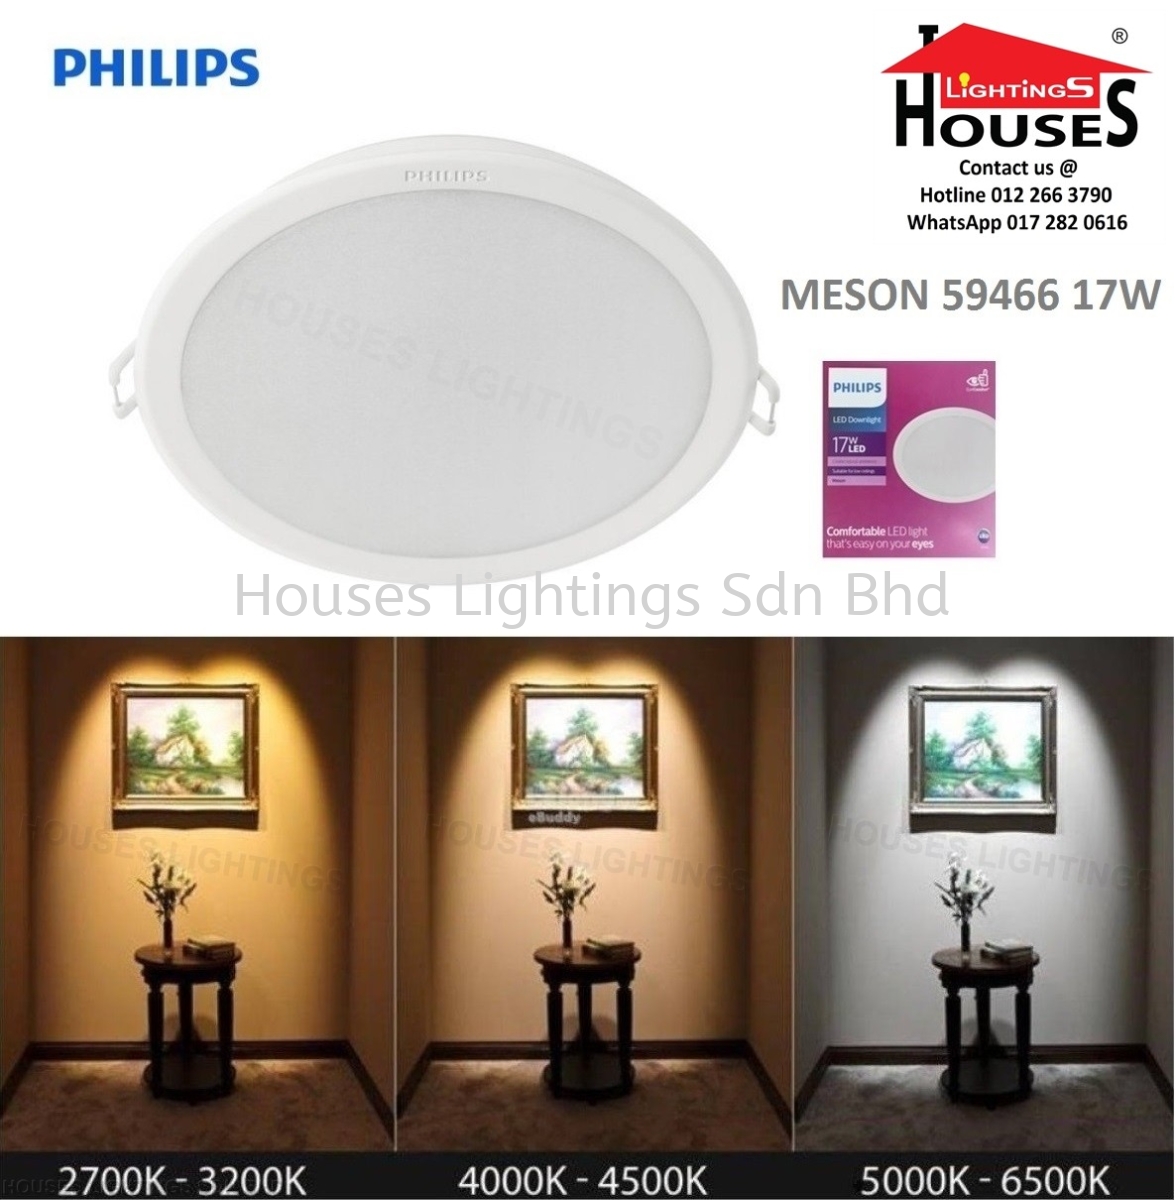 PHILIPS MESON 59466 17W Philips Led Downlight Selangor, Malaysia, Kuala  Lumpur (KL), Puchong Supplier, Suppliers, Supply,